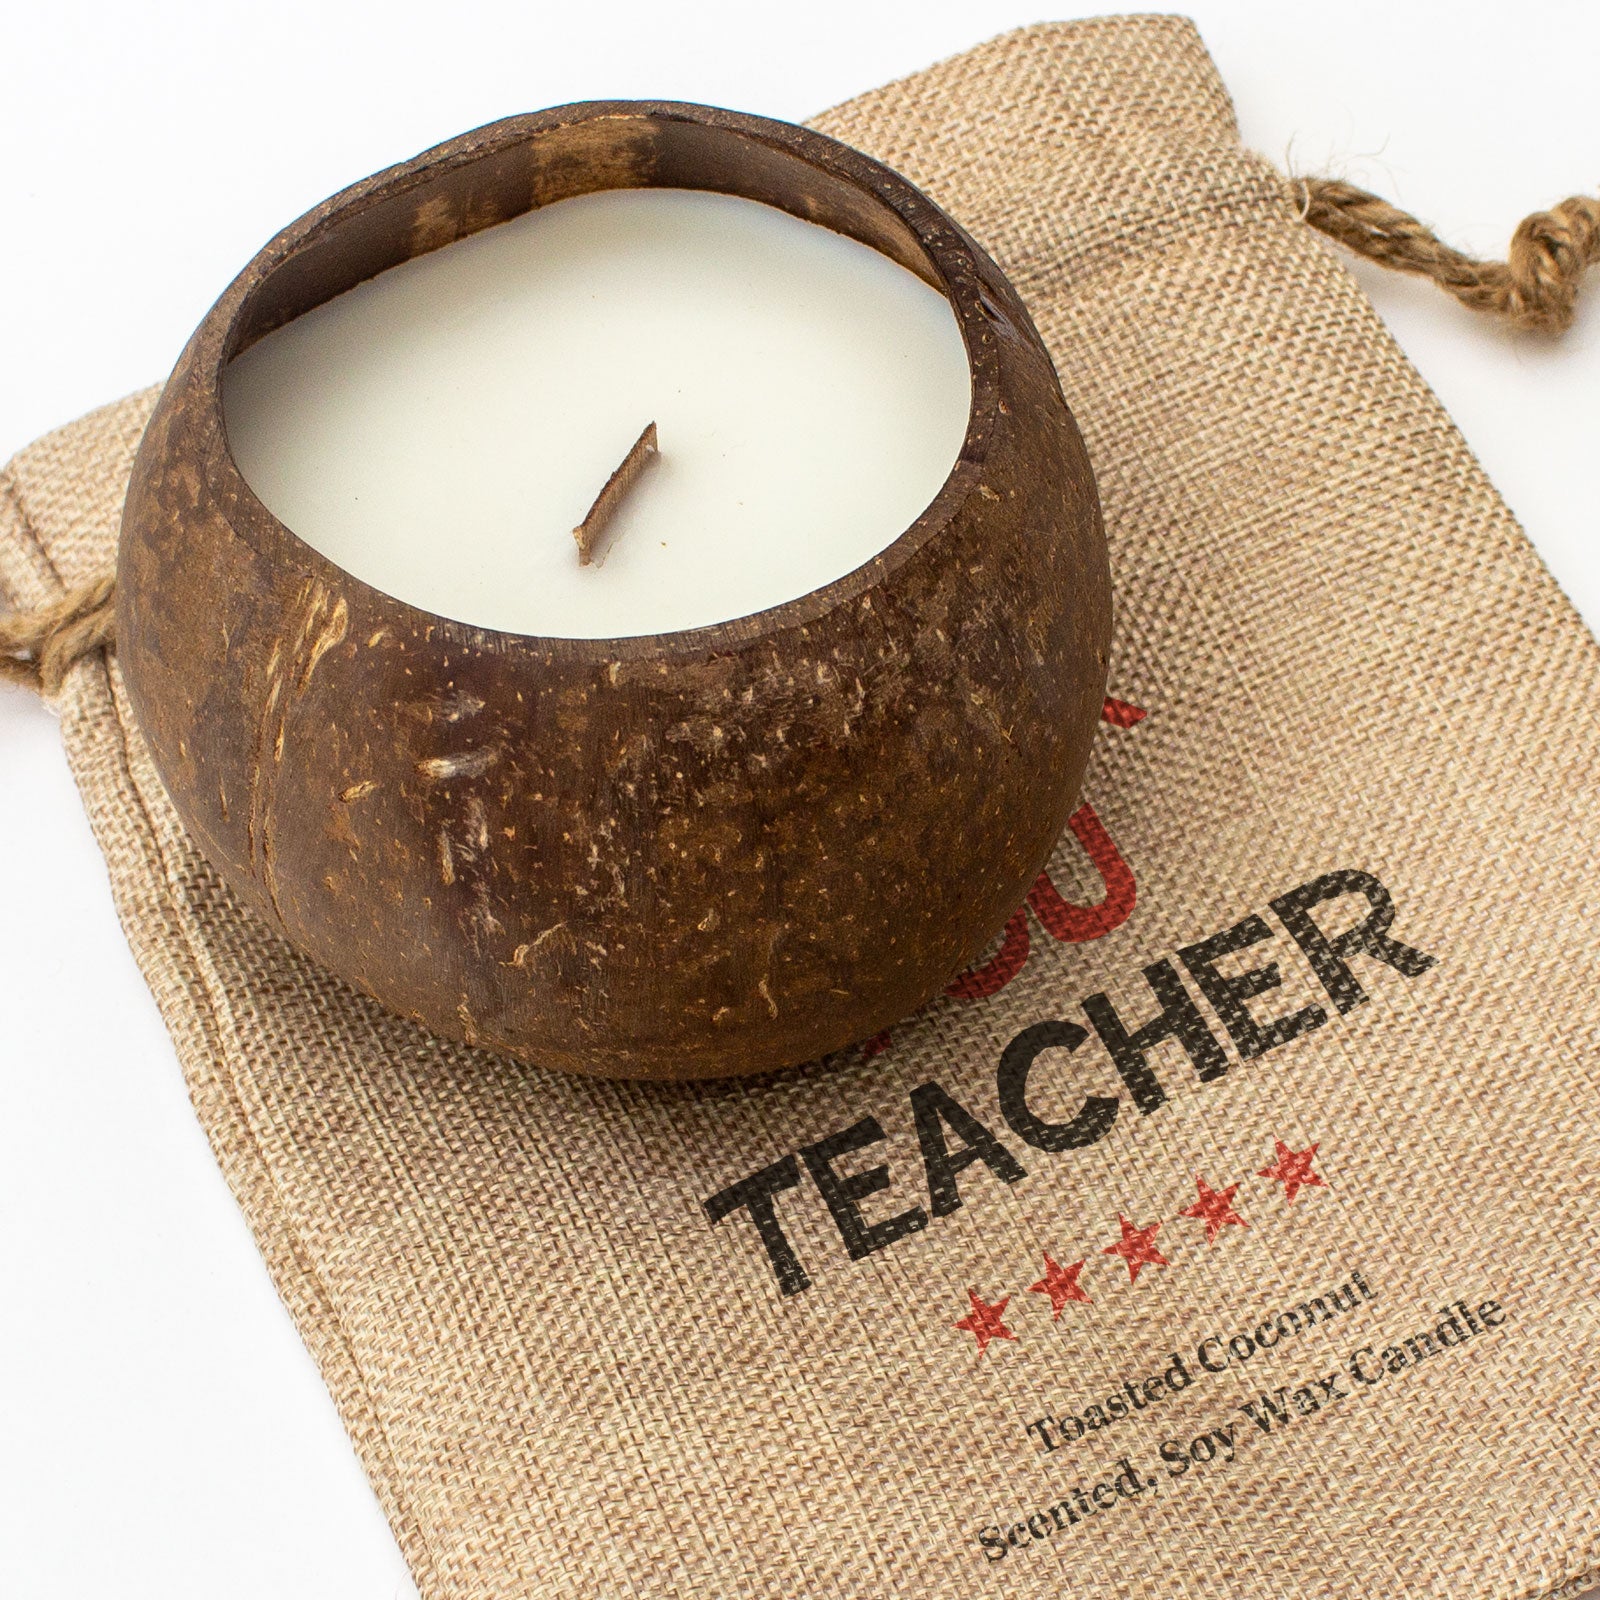 THANK YOU TEACHER - Toasted Coconut Bowl Candle – Soy Wax - Gift Present